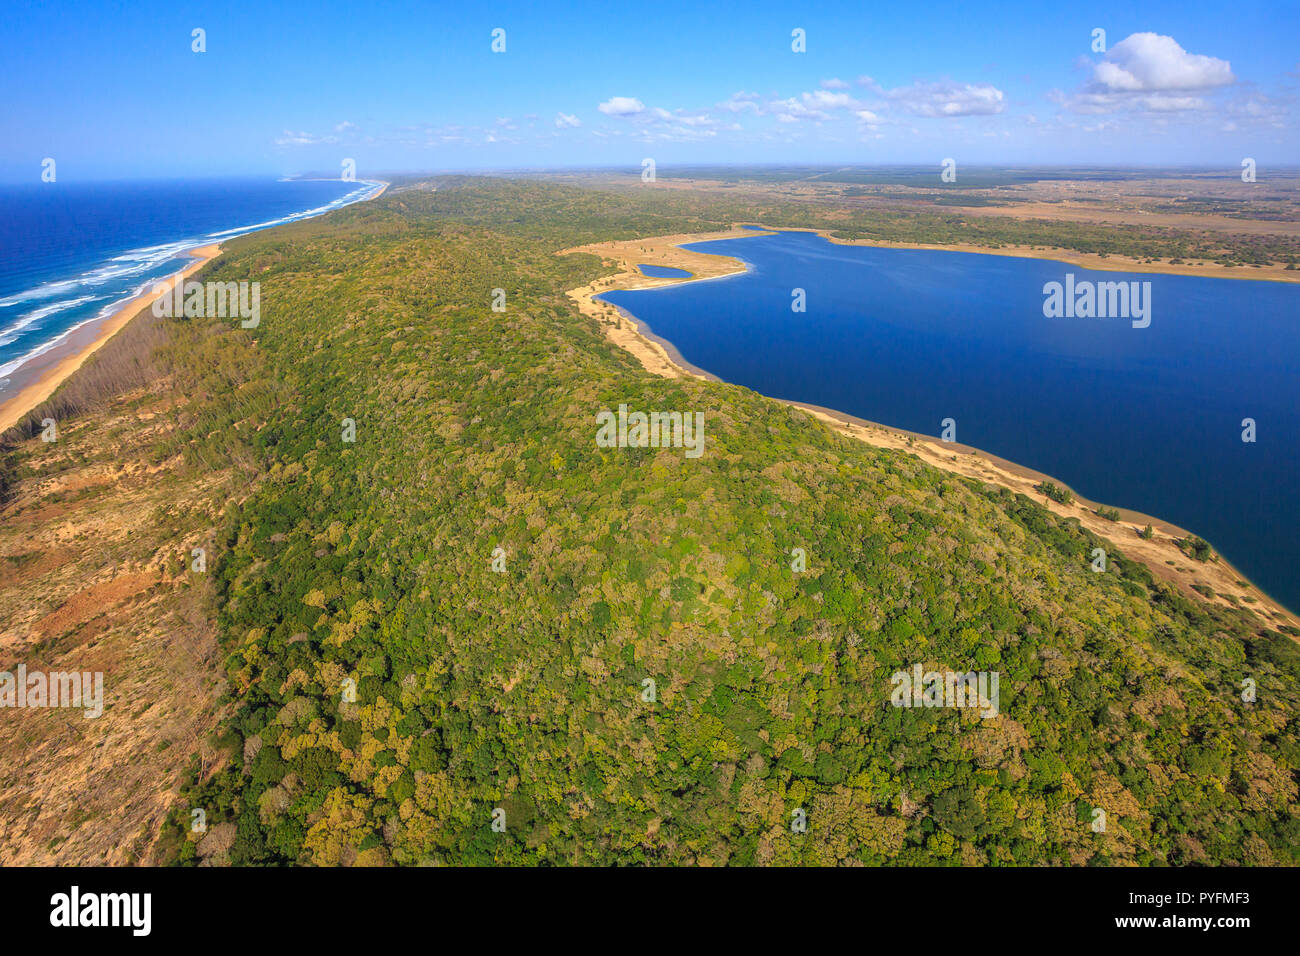 Aerial view of Sodwana Bay National Park within the iSimangaliso Wetland Park, Maputaland, an area of KwaZulu-Natal on the east coast of South Africa. Stock Photo